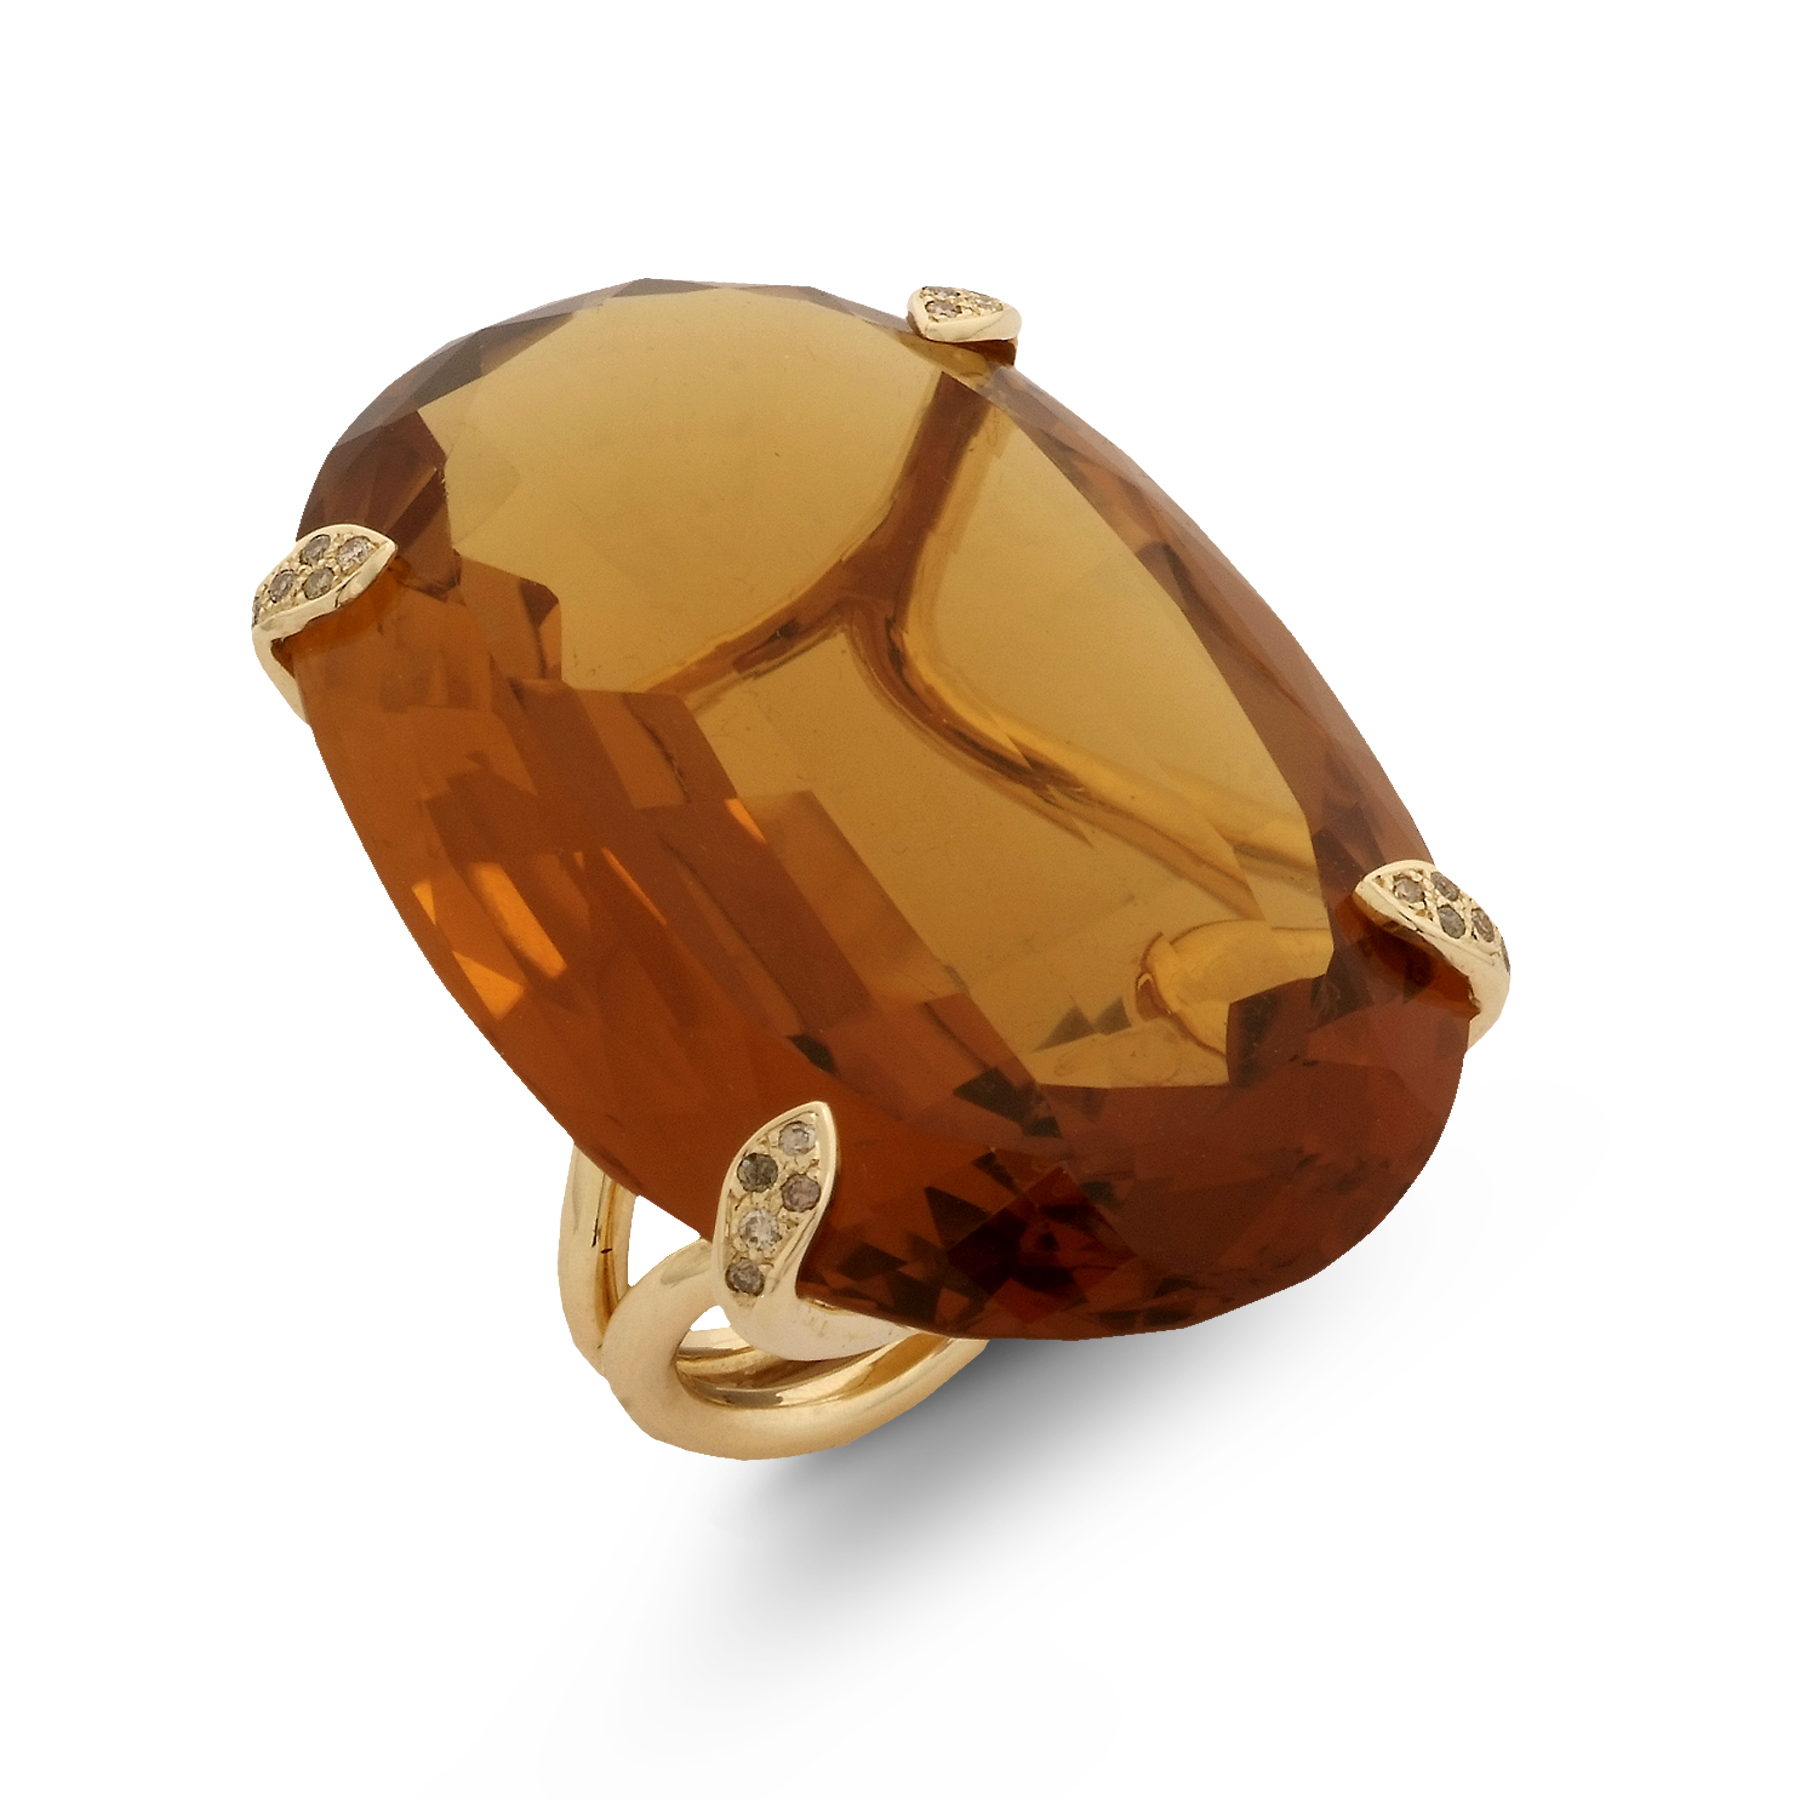 Oval-shaped-citrine-Planet-ring-SN44.jpeg